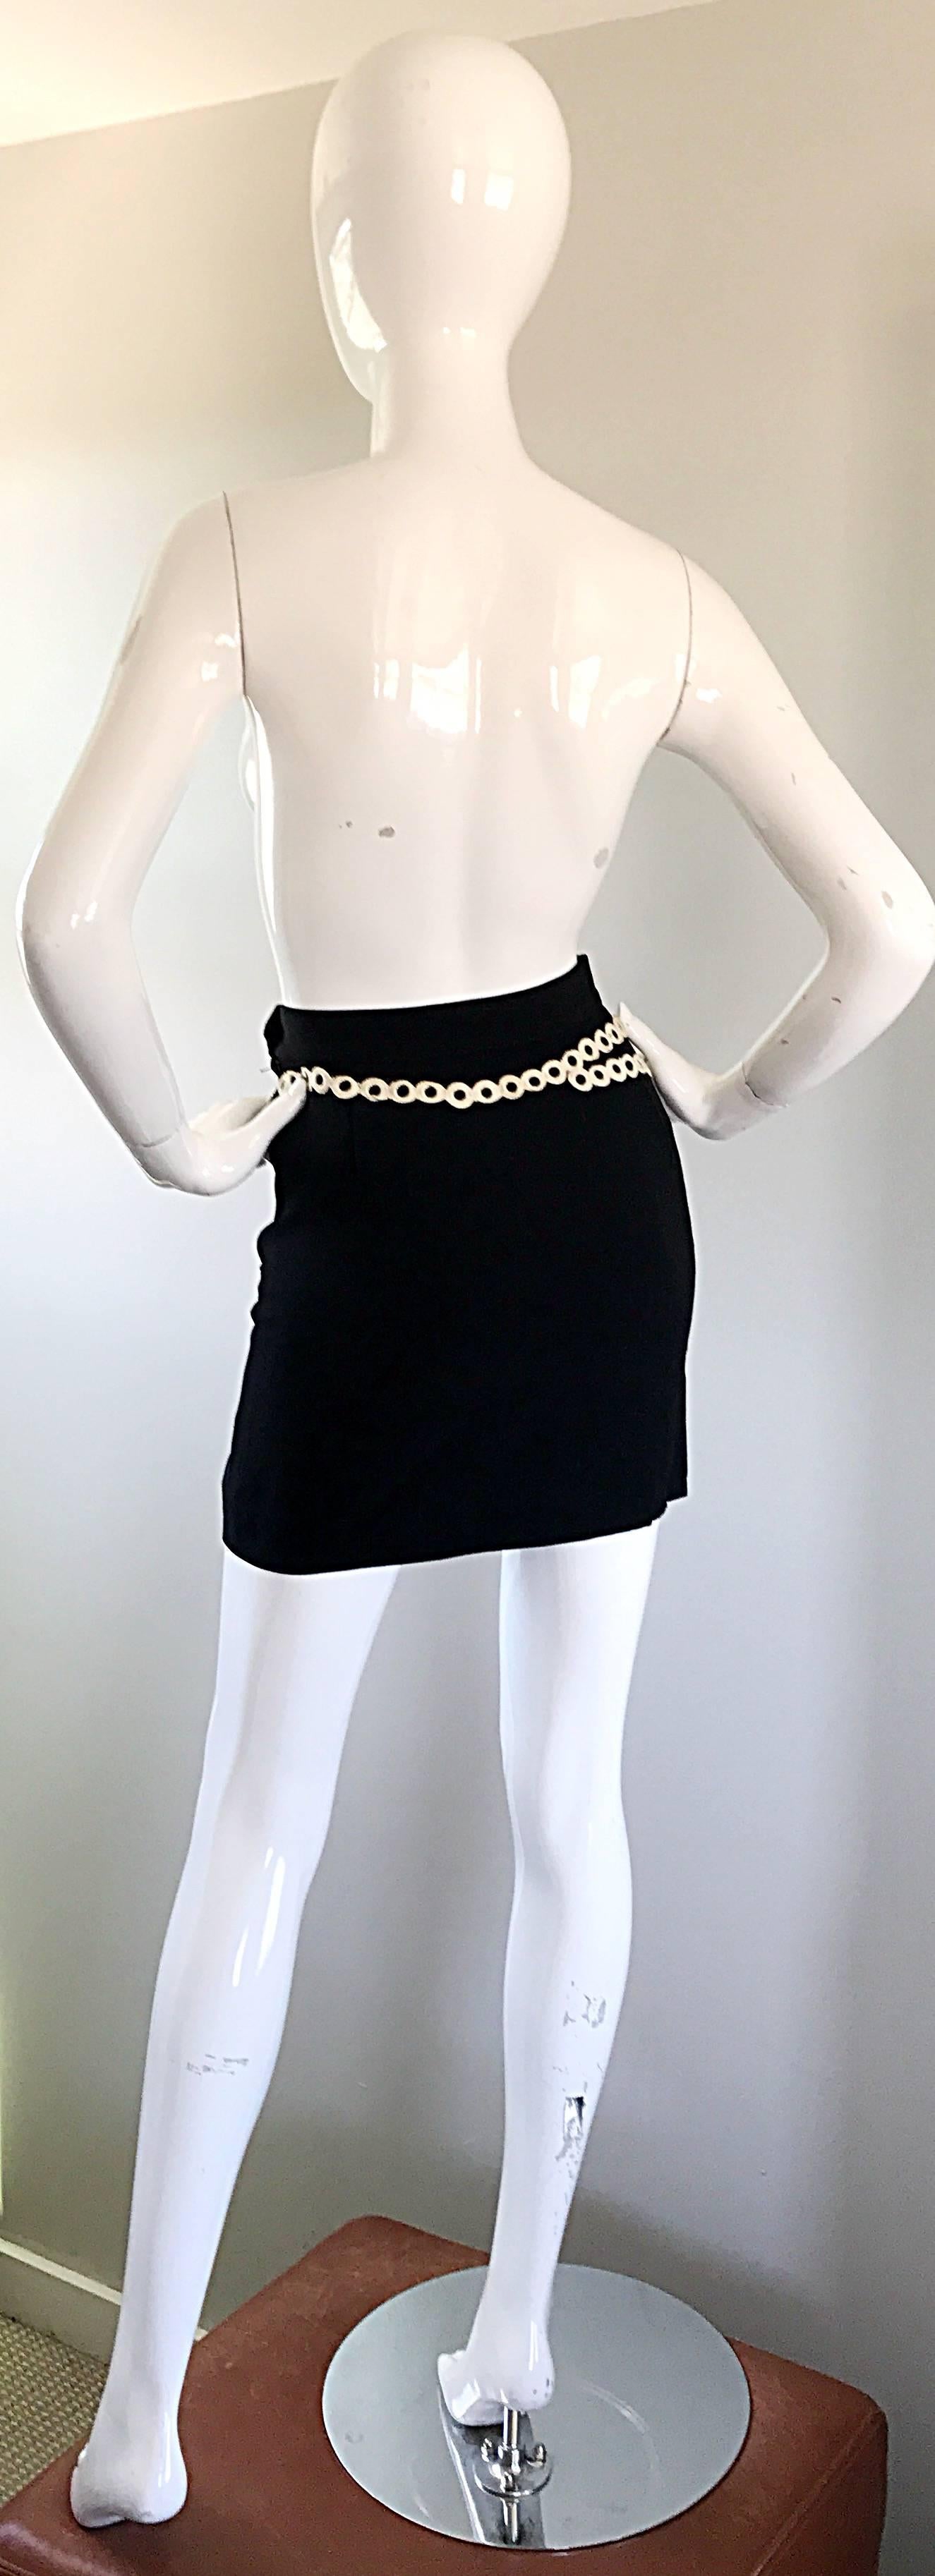 1990s Moschino Cheap and Chic Black and White Trompe l'oeil Vintage Mini Skirt For Sale 3